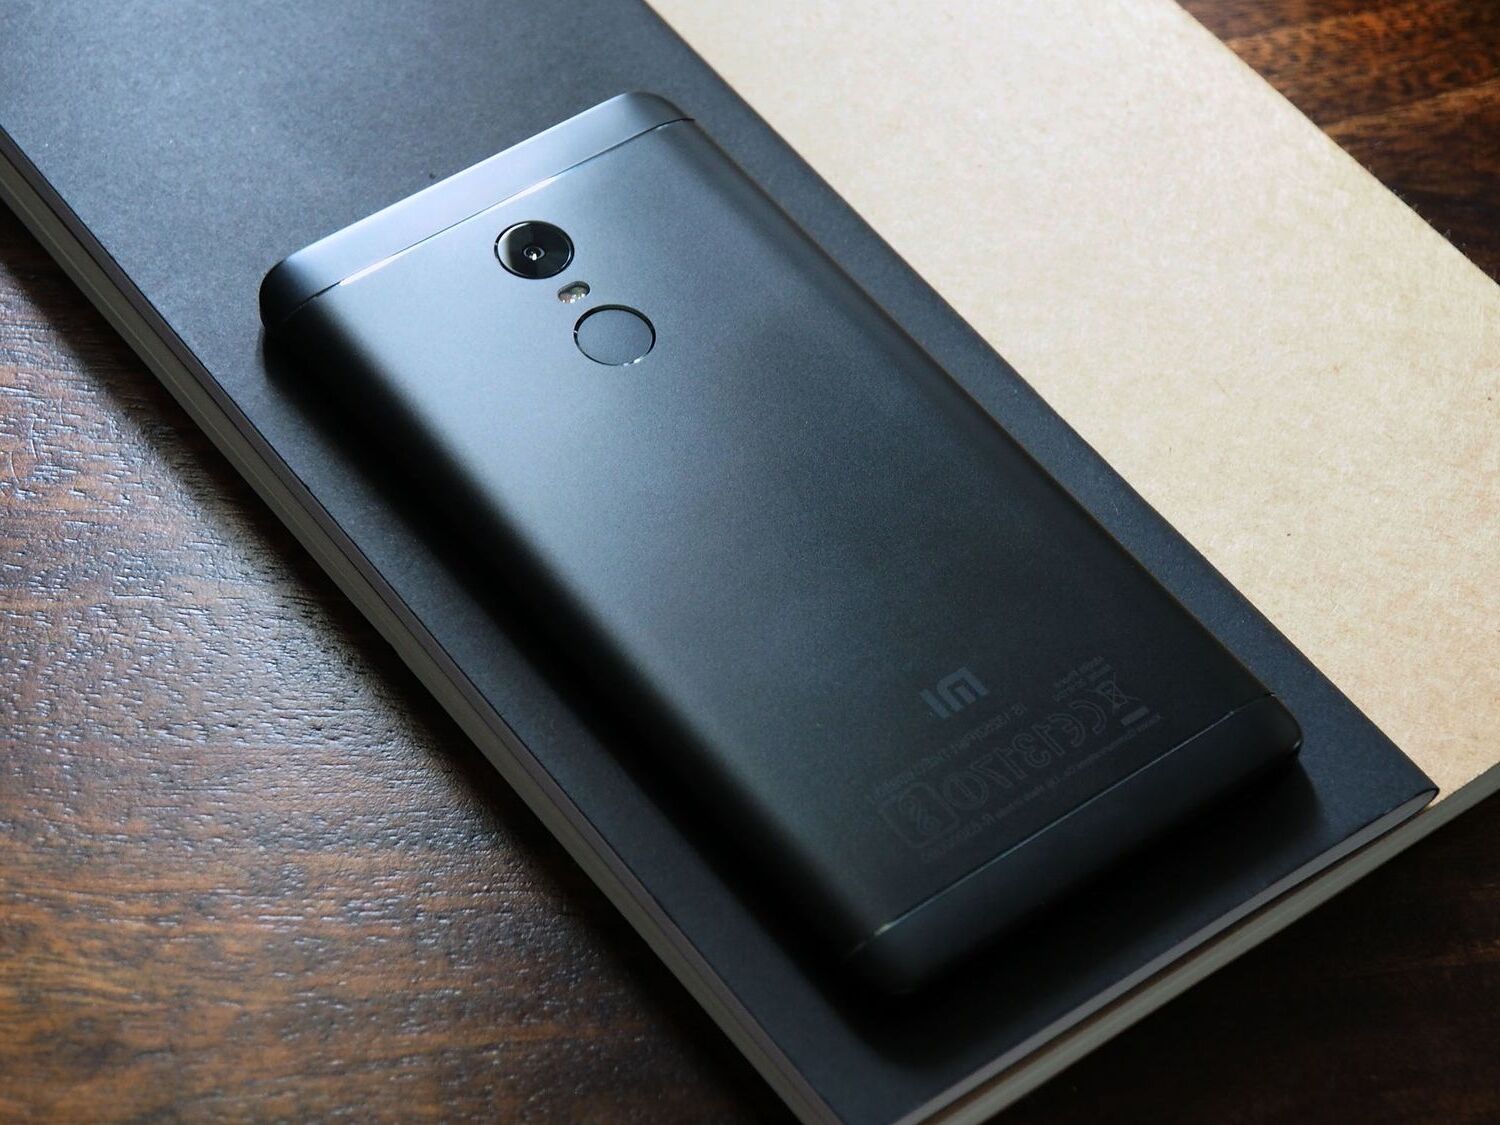 configuring-region-settings-on-redmi-note-4